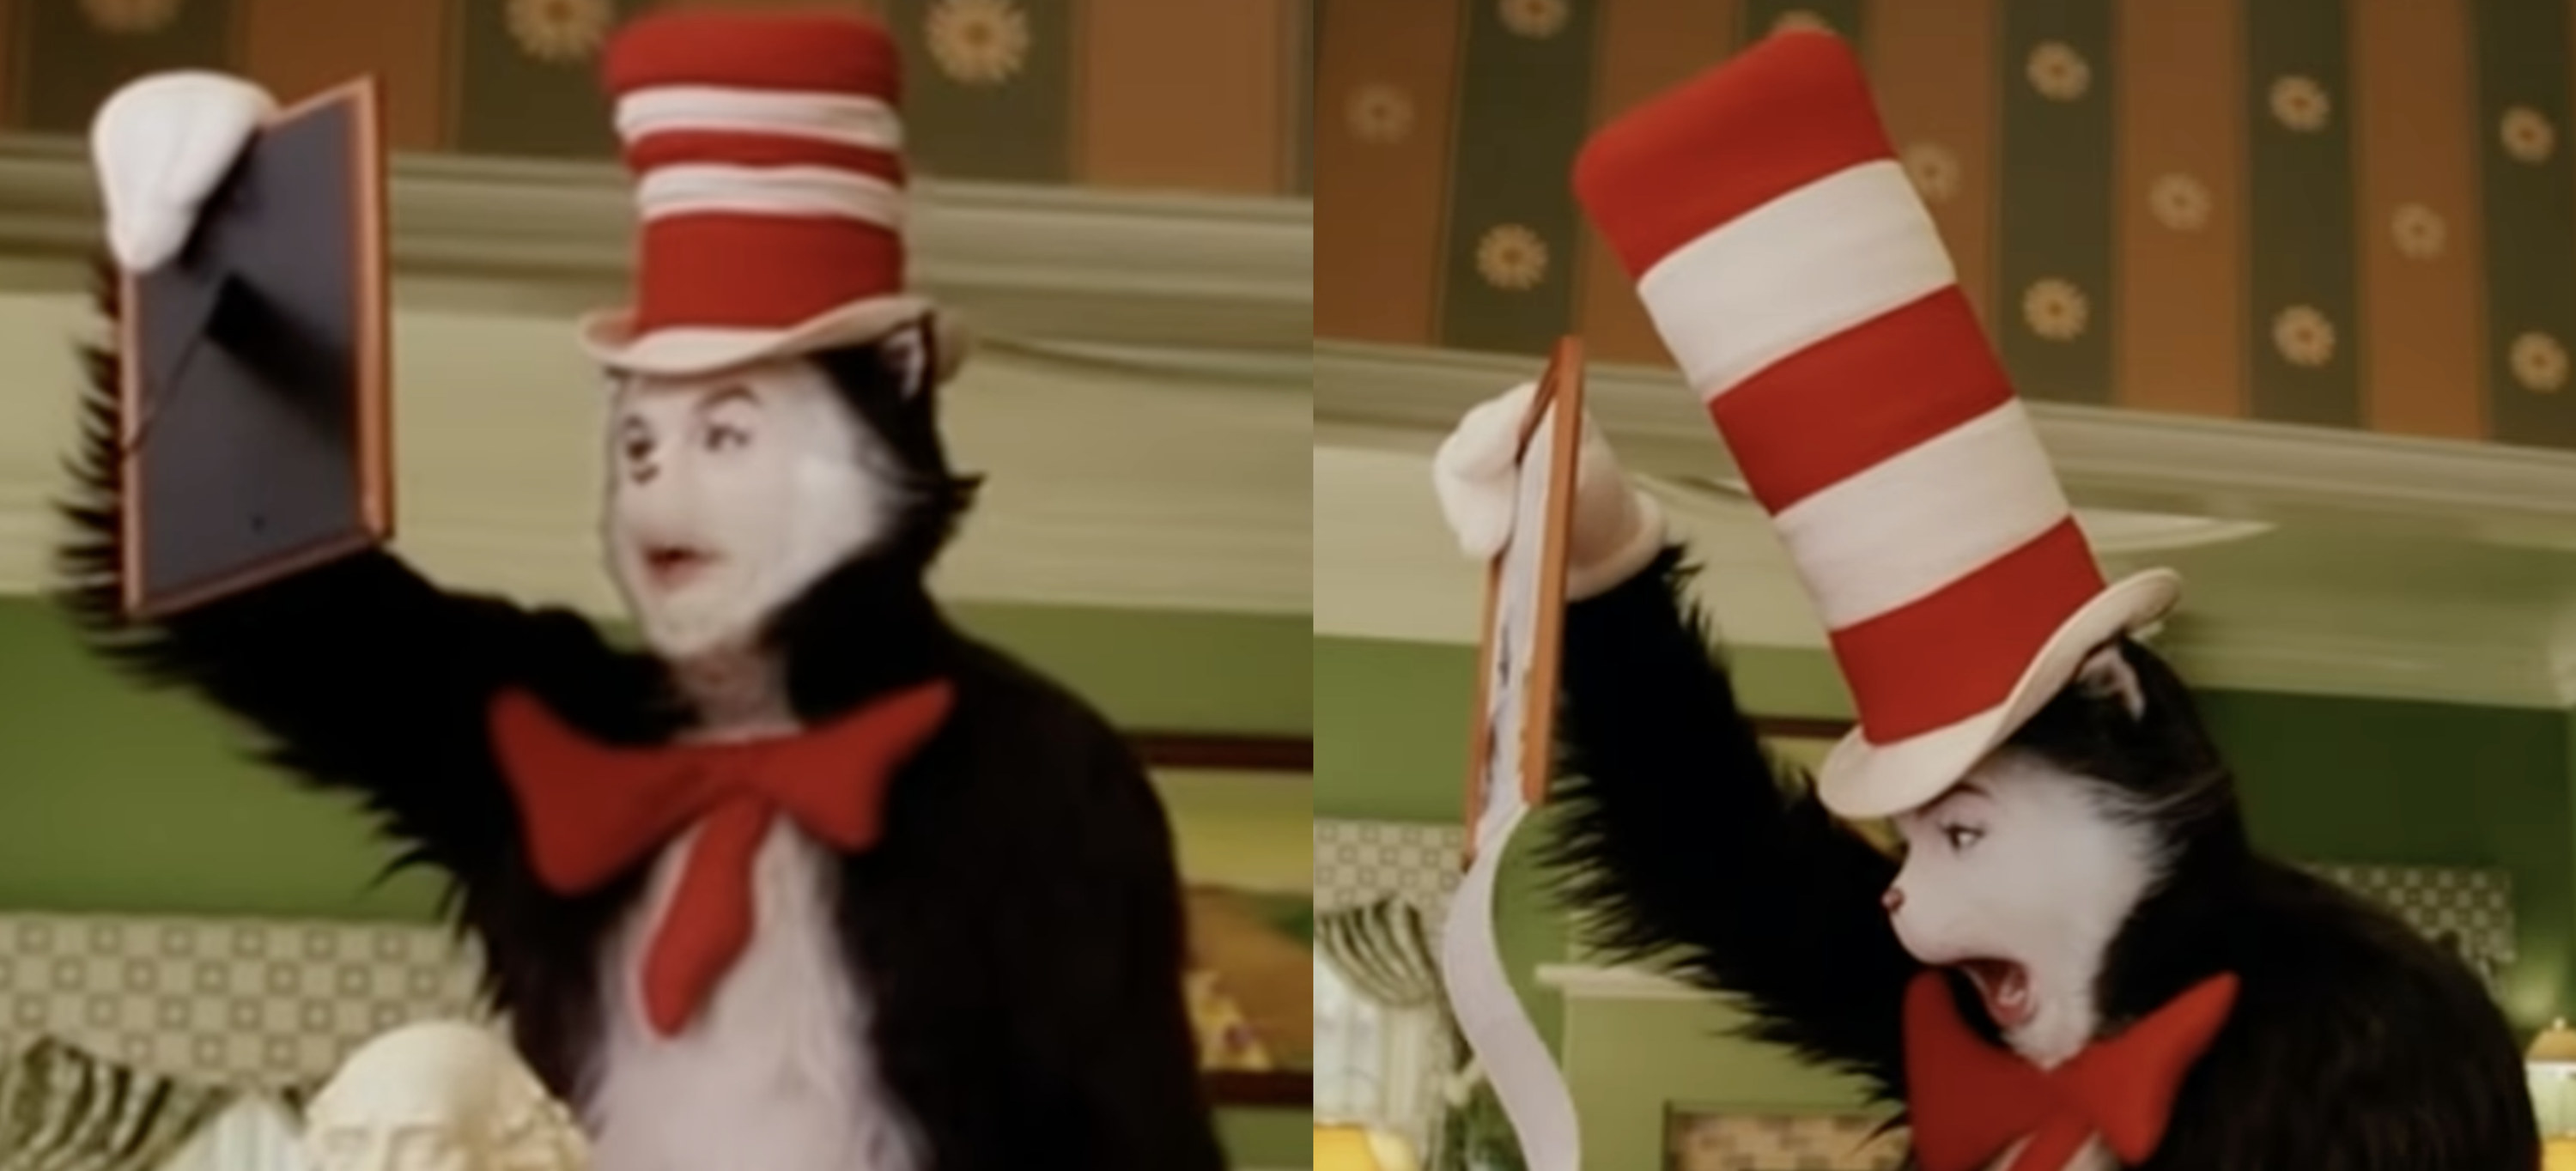 The Cat in the Cat in the Hat